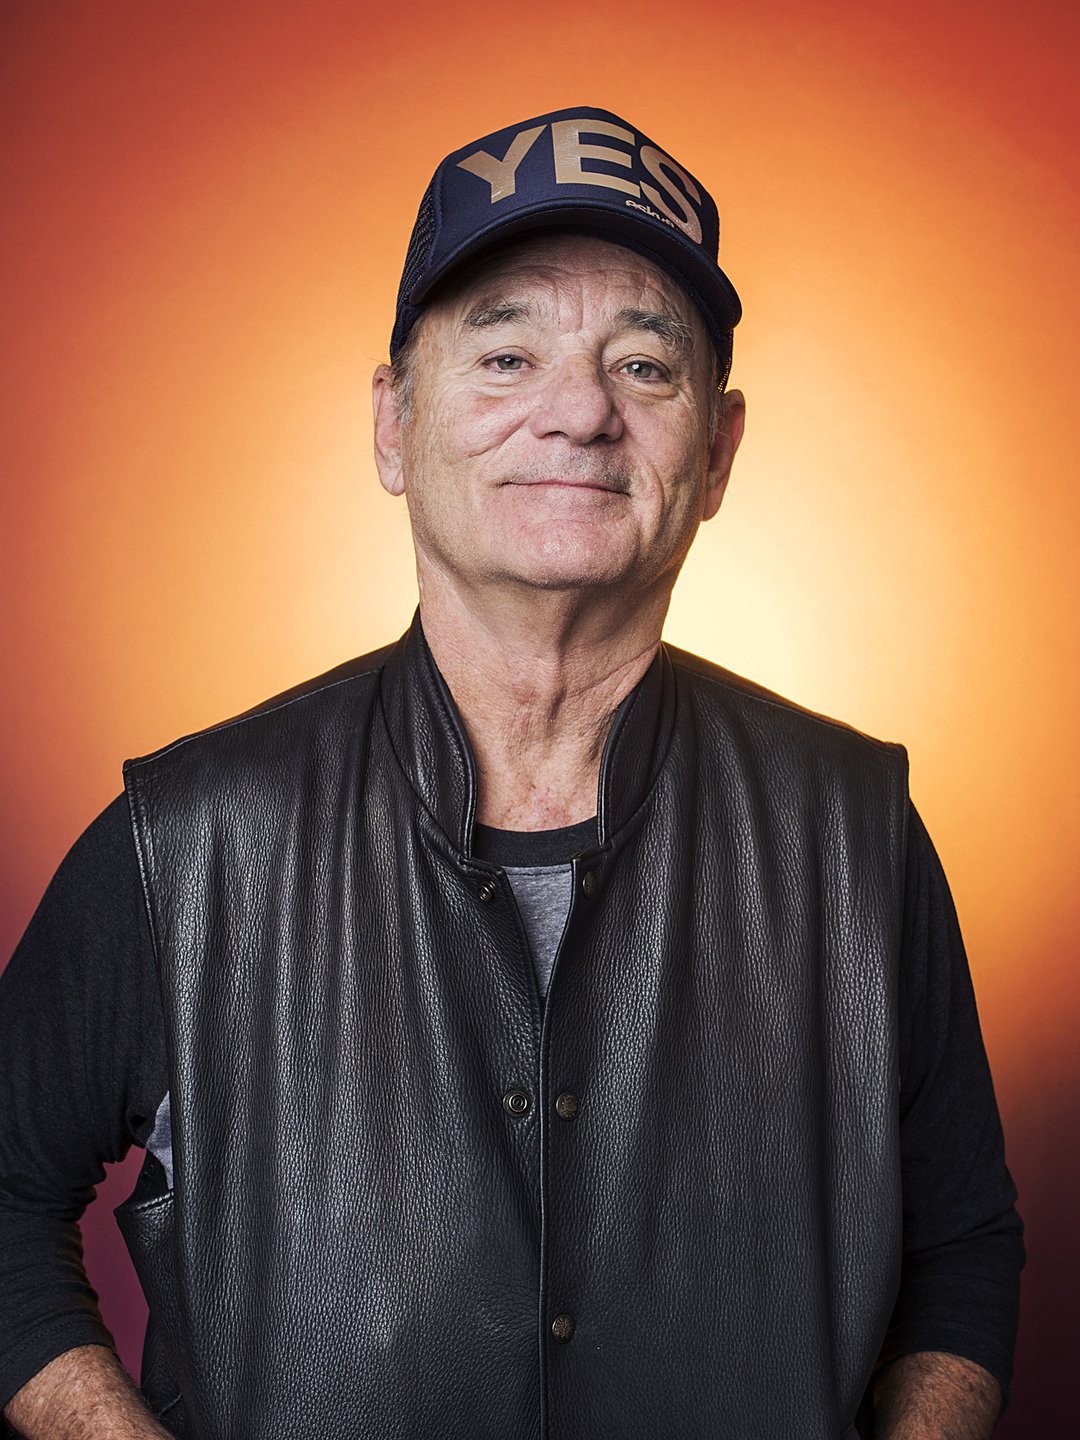 Bill Murray who are his parents